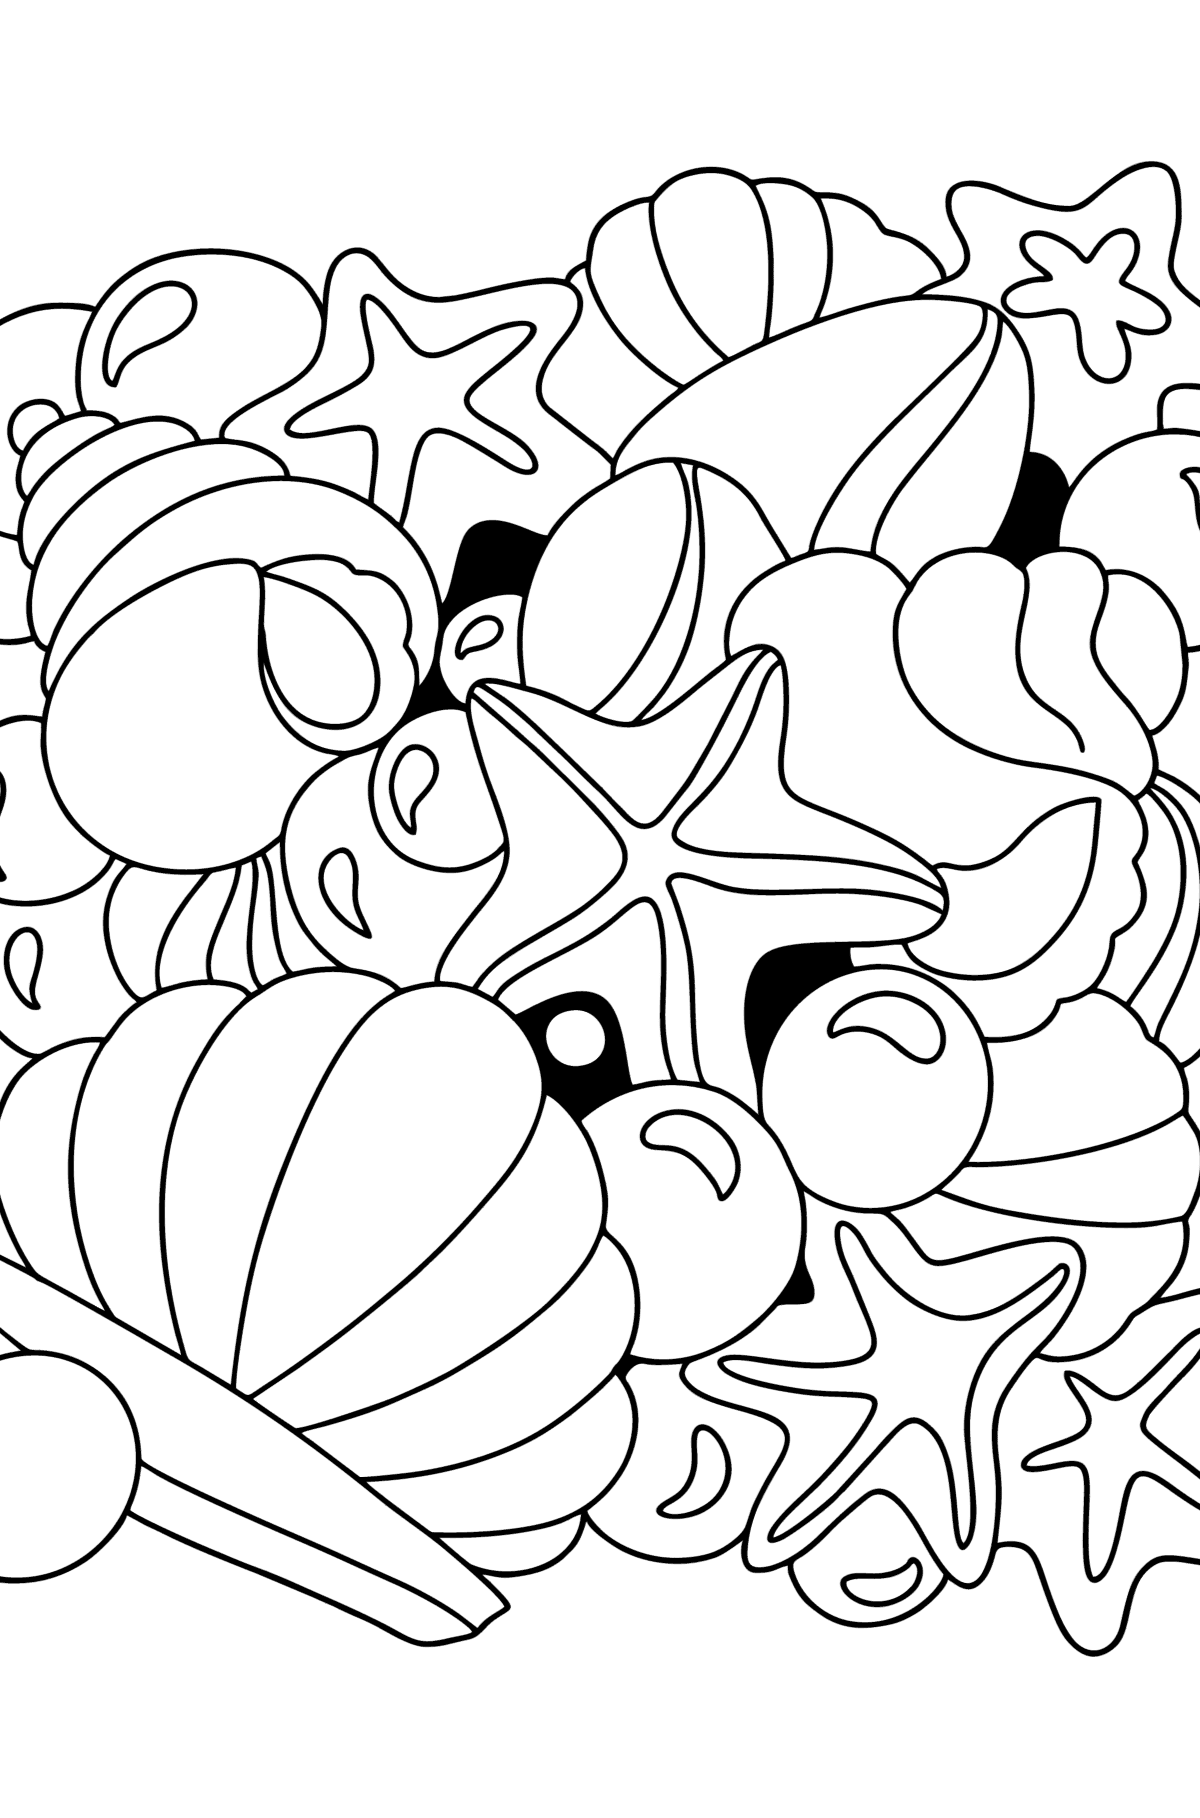 Doodle coloring page for Kids - Shells - Coloring Pages for Kids